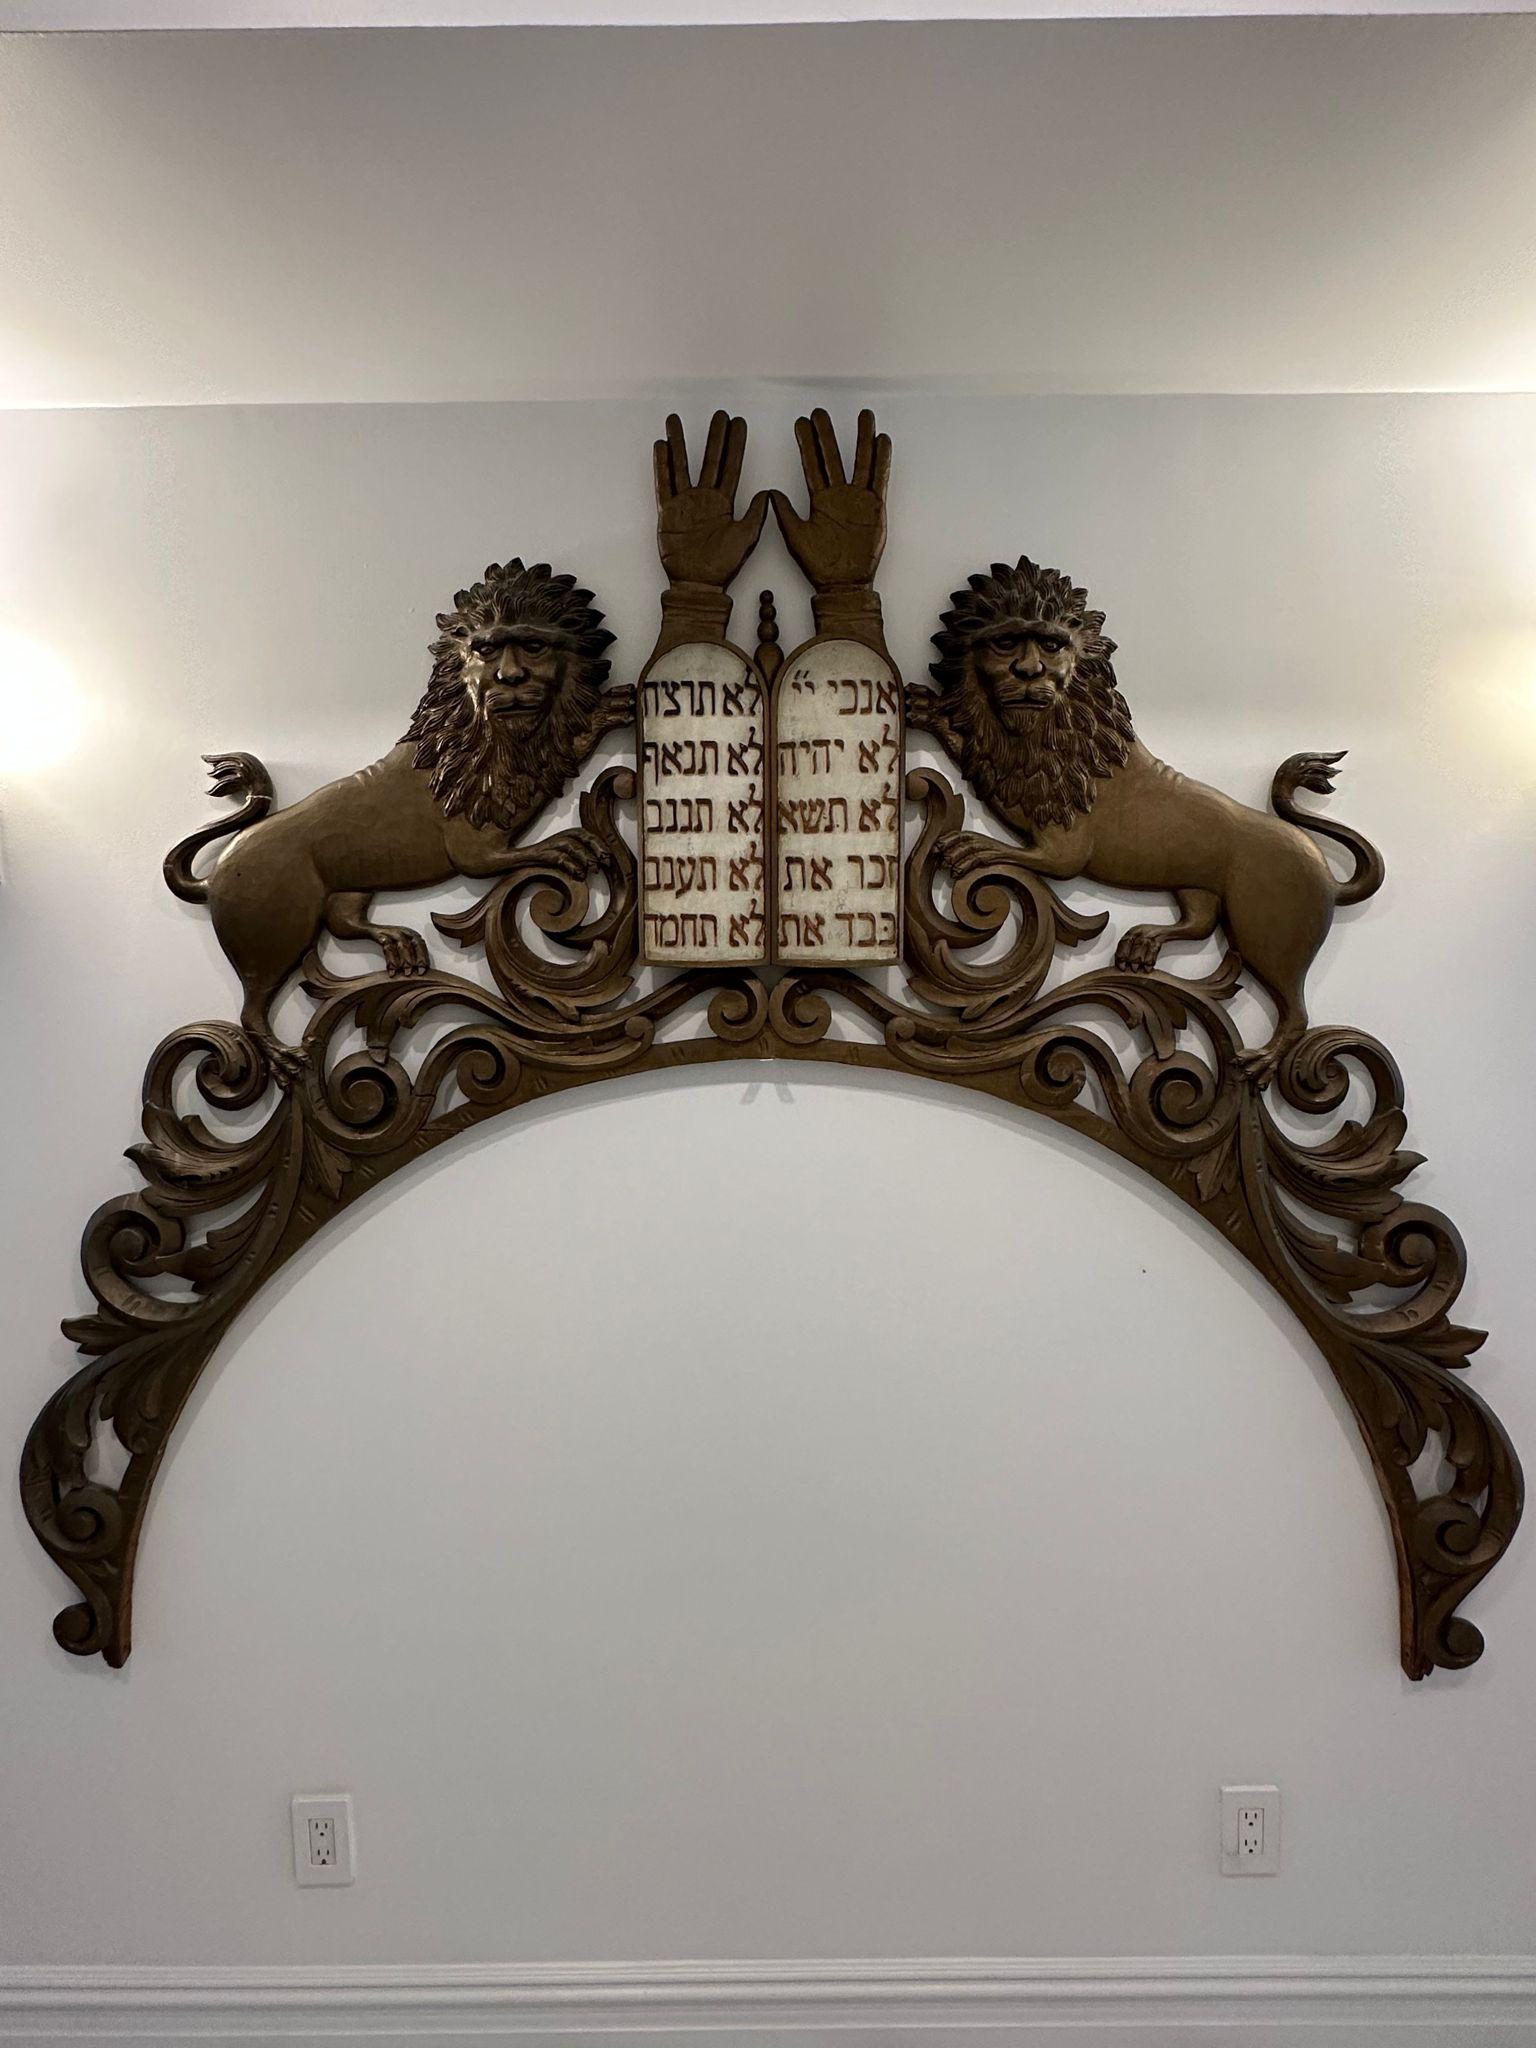 Monumental American folk art Torah Arc decoration from a synagogue. This carved wooden torah arc was made by German-Jews immigrants to the United States who were experts in this craftsmanship. These artisans contributed among others to the formation